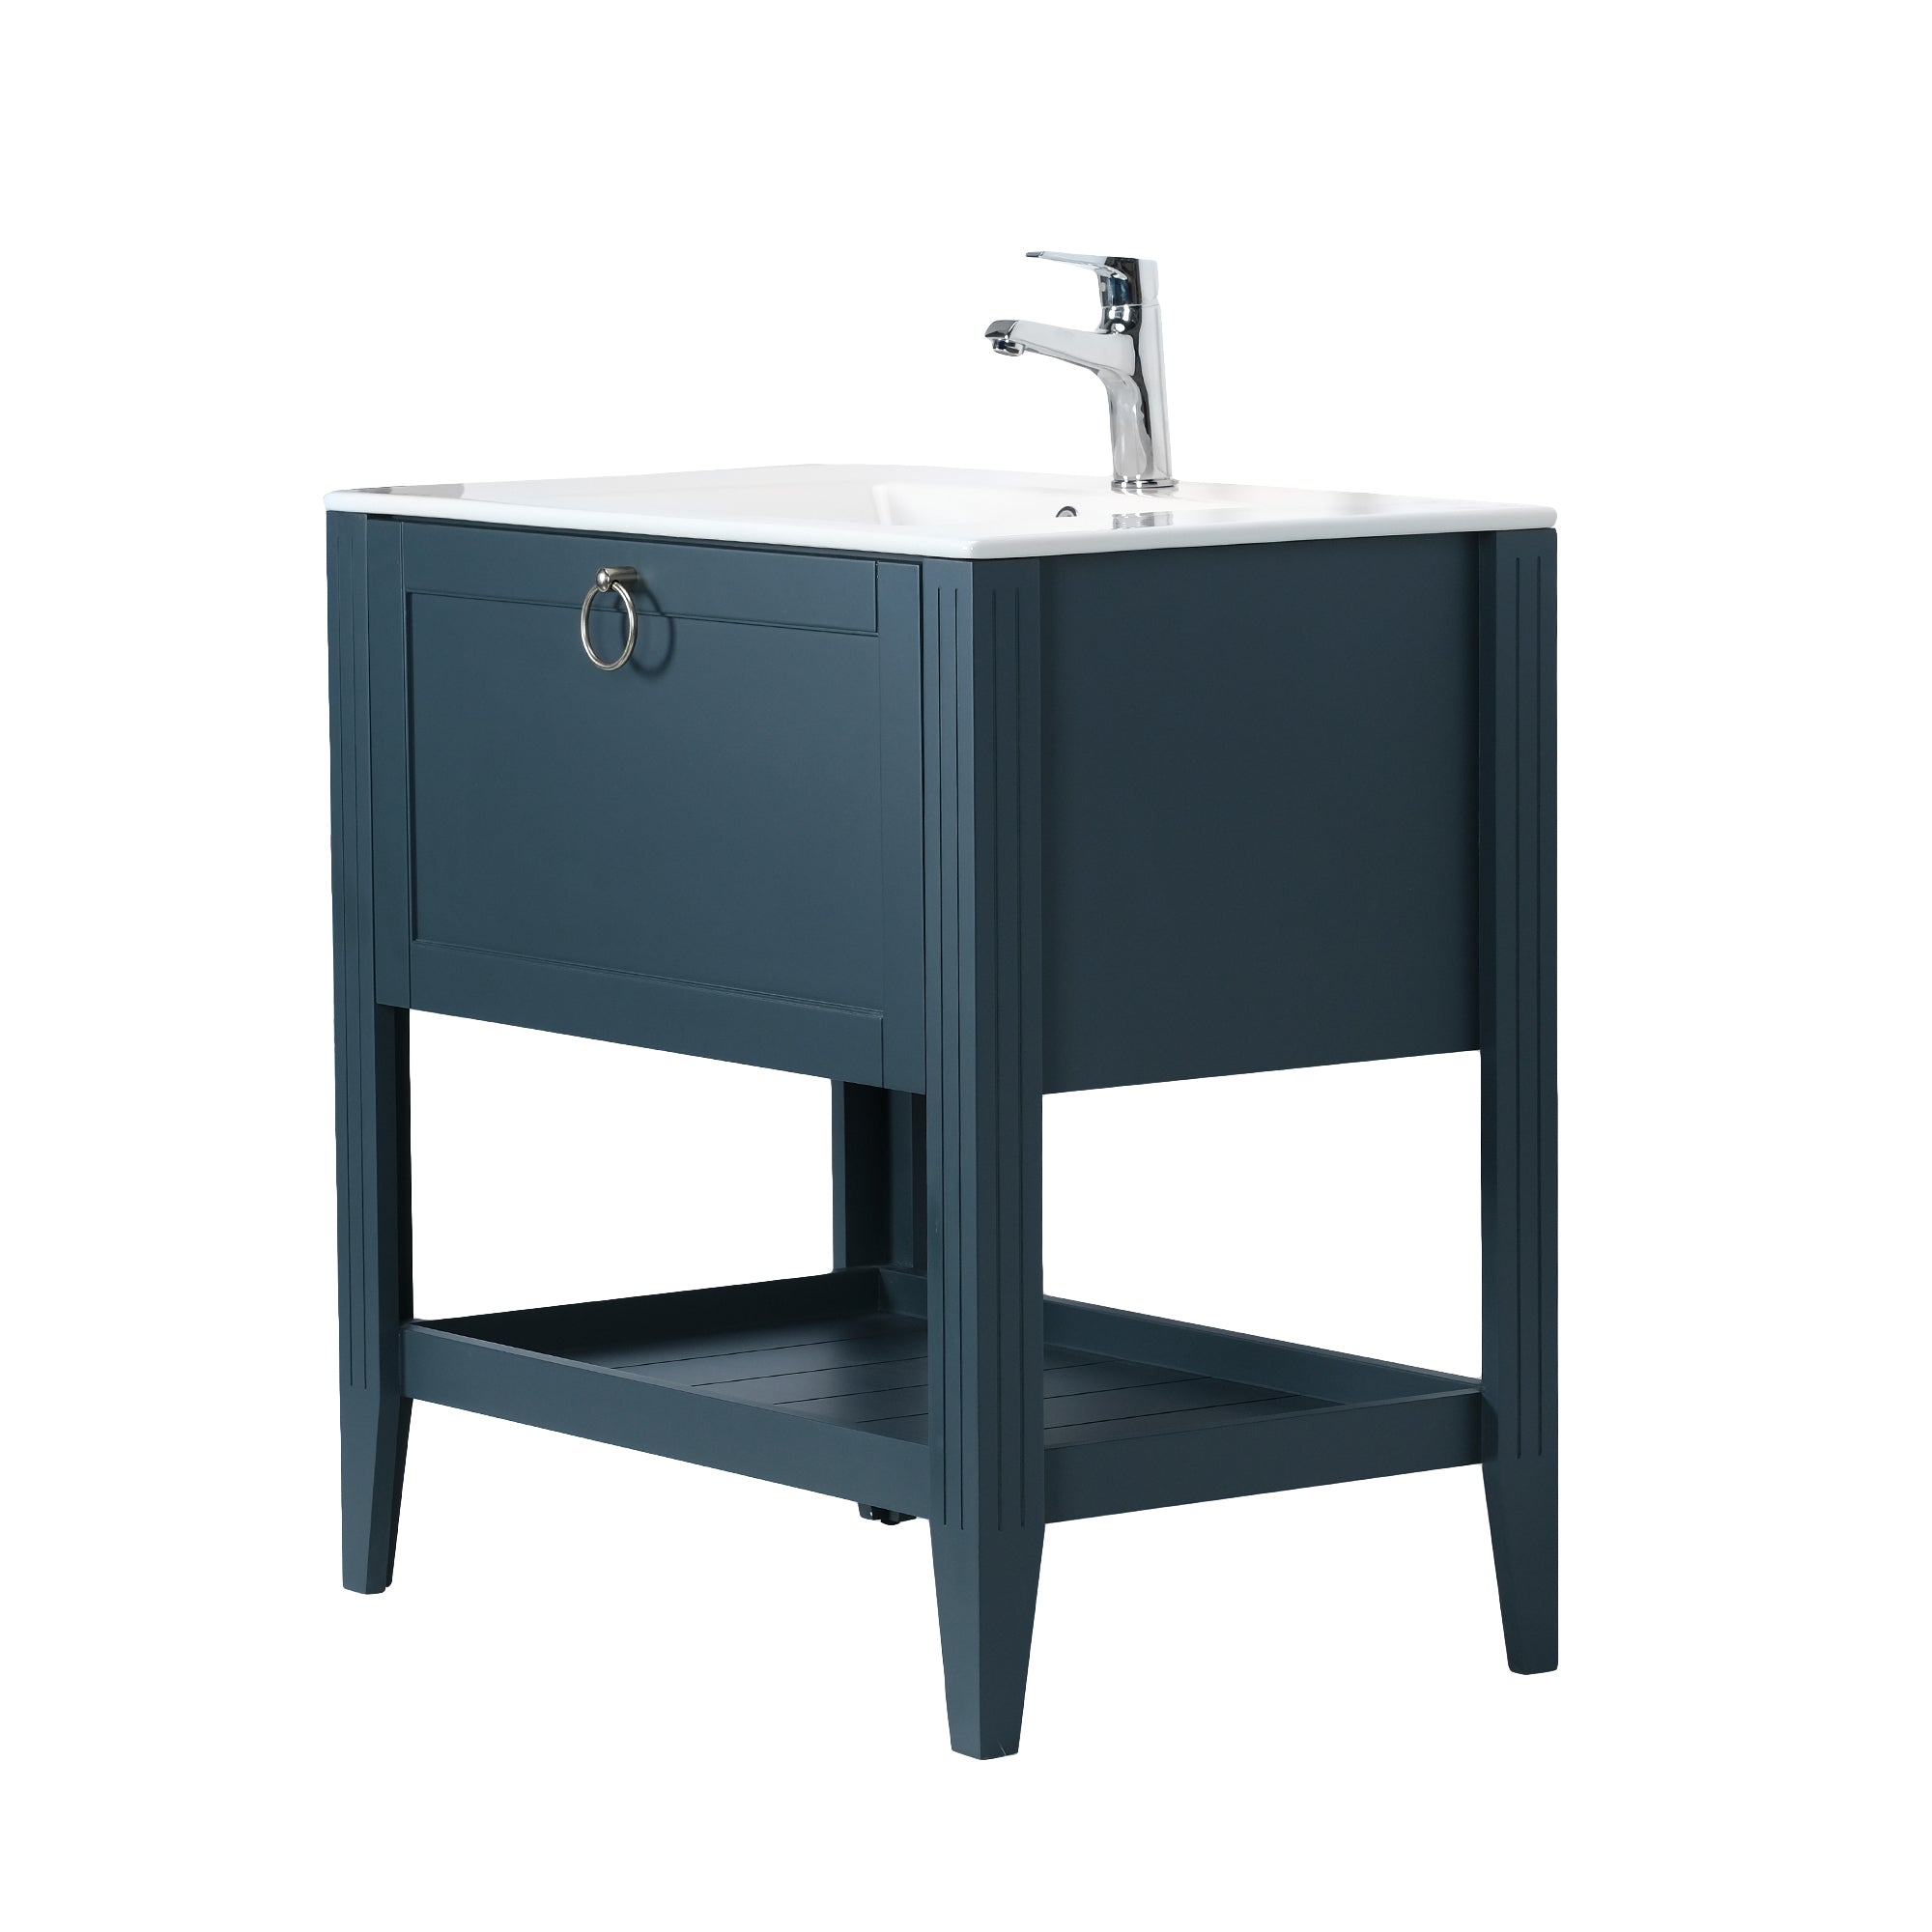 SOFIA 32INCH FREE STANDING VANITY AND SINK COMBO - CHARCOAL GRAY